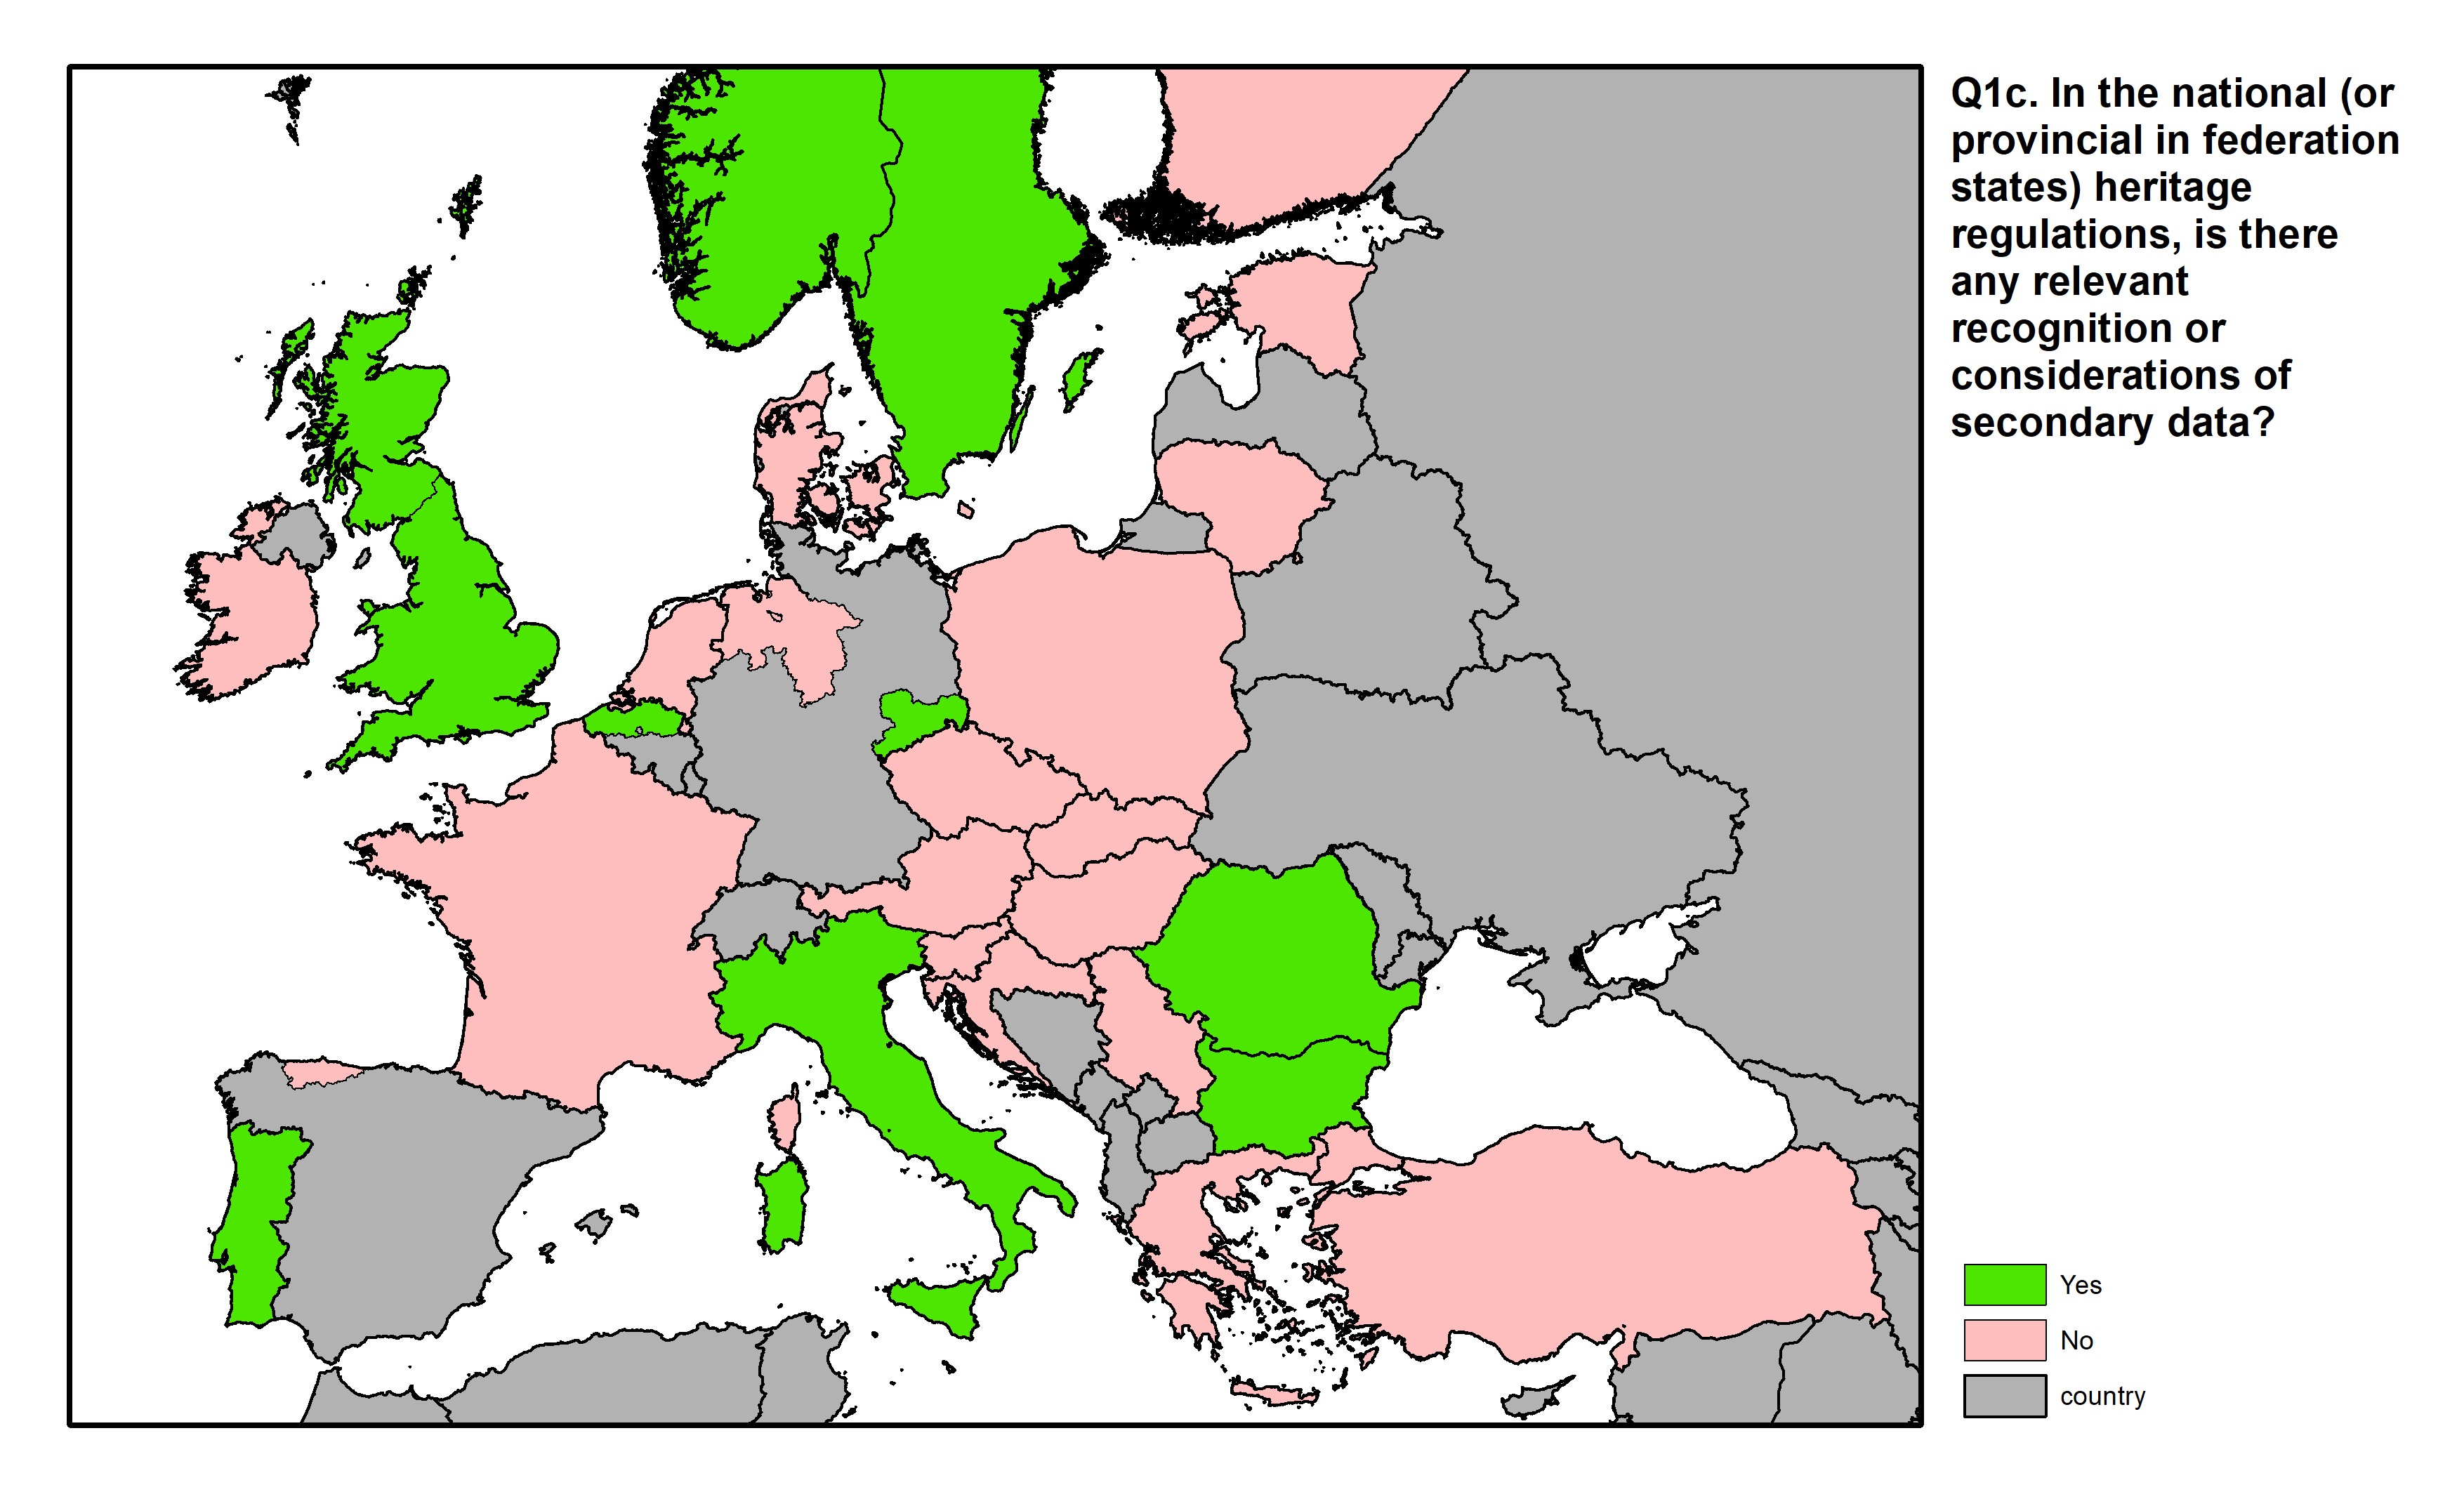 Figure 4: a map of Europe showing countries and regions in colour based on response rates to the survey question.